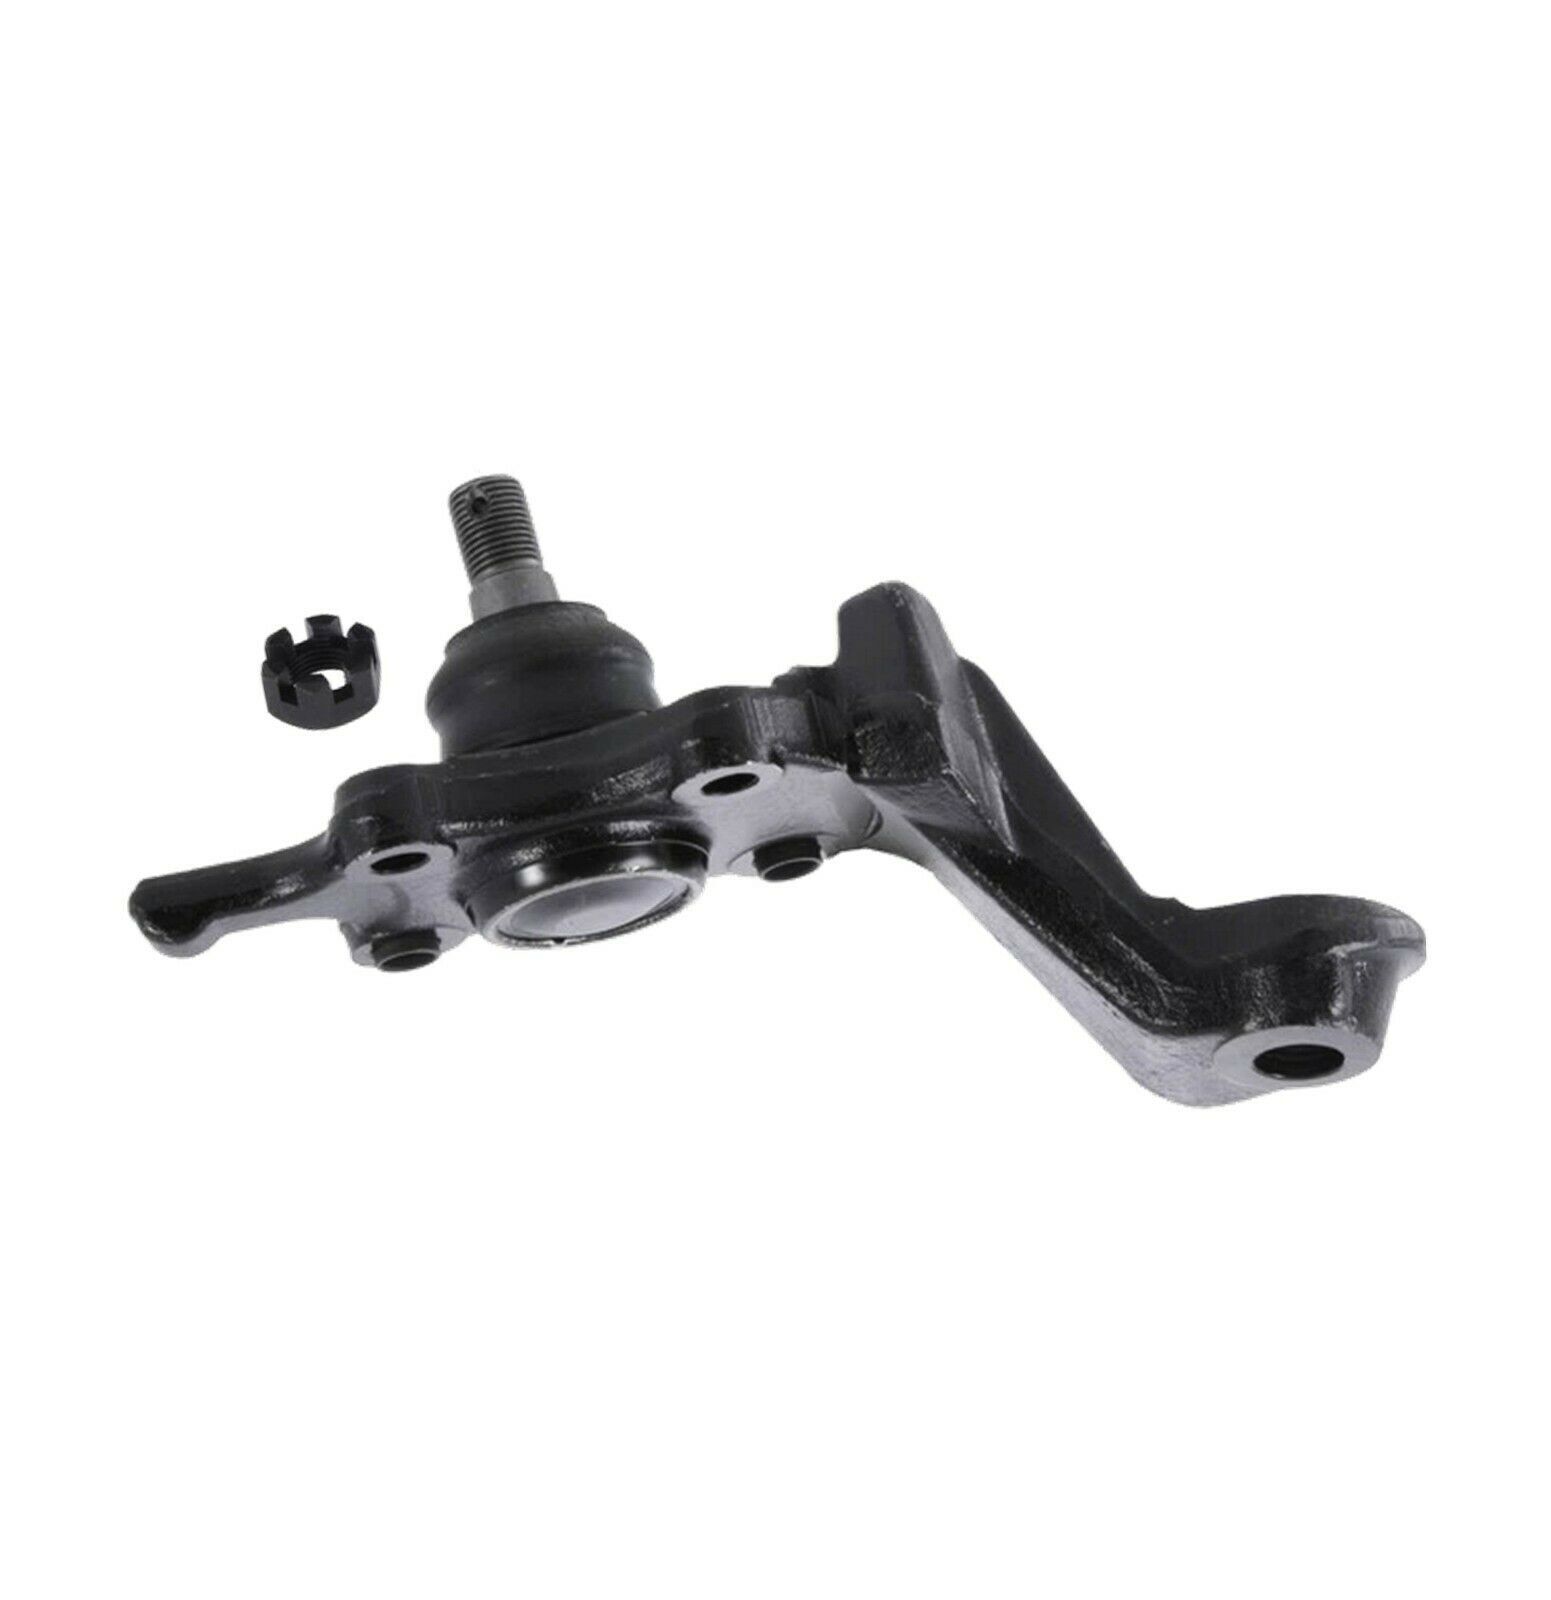 1 Pc New Front Lower Ball Joint Passenger Side for Tacoma 1995-2004 4WD Models